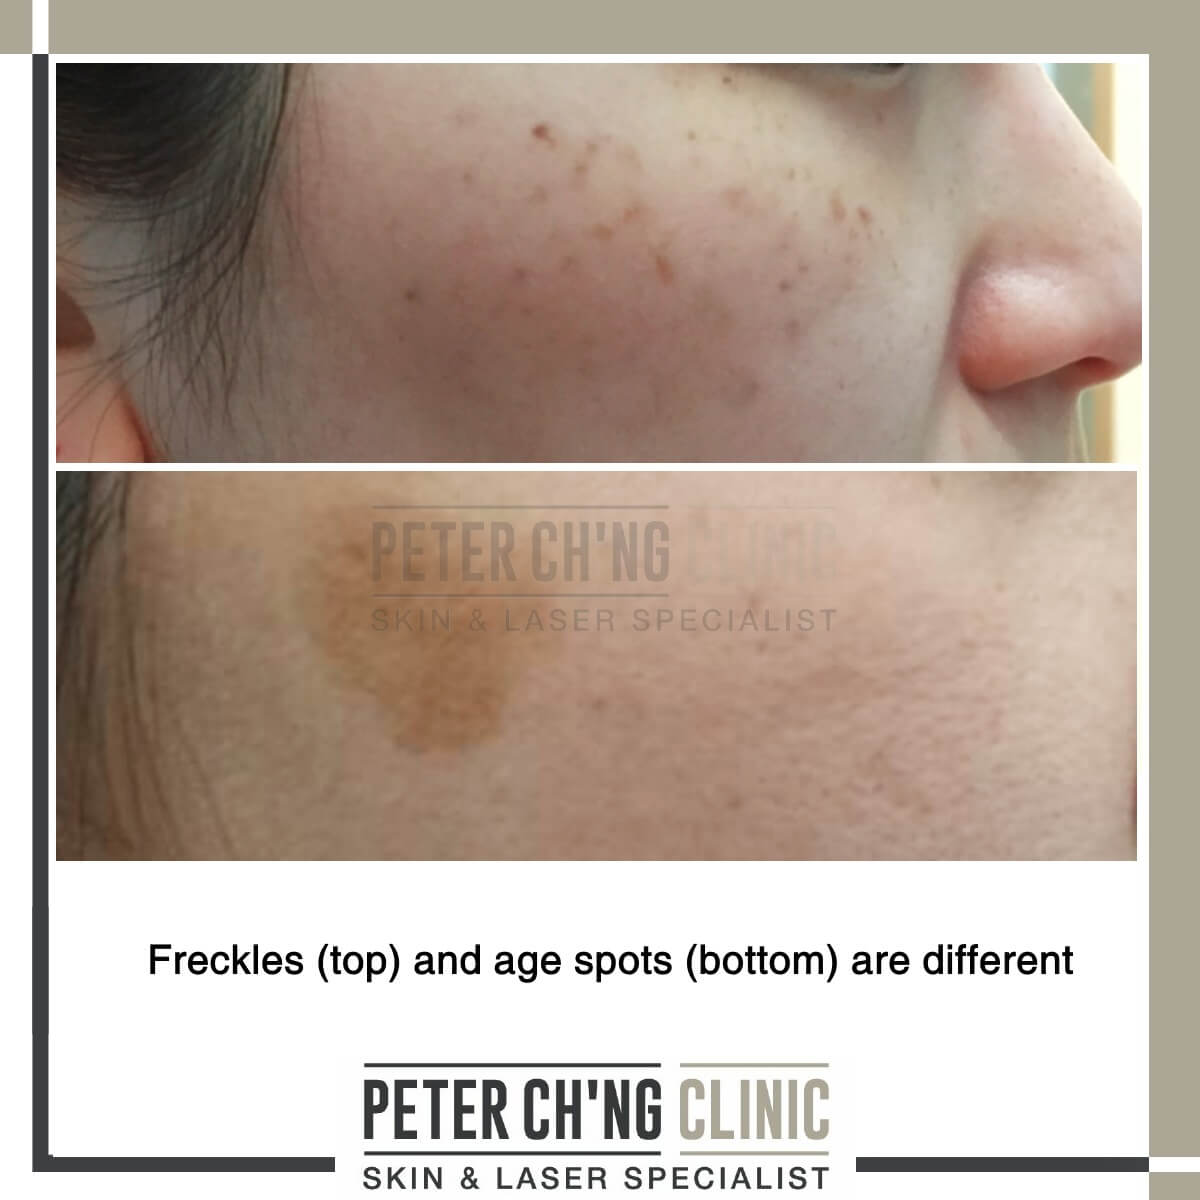 Age spots and freckles